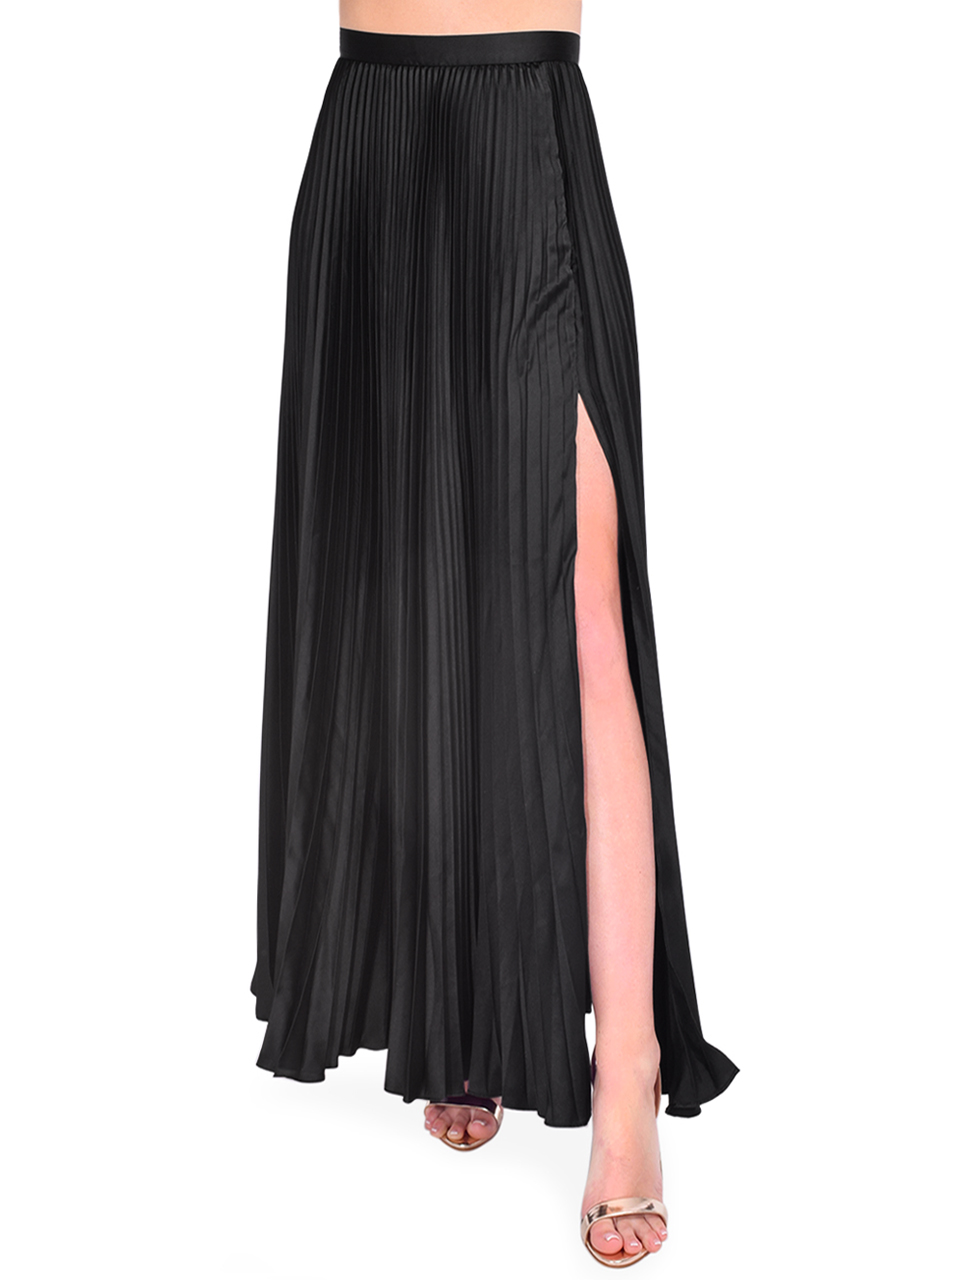 AMUR Sofie Pleated Skirt in Black Front View 